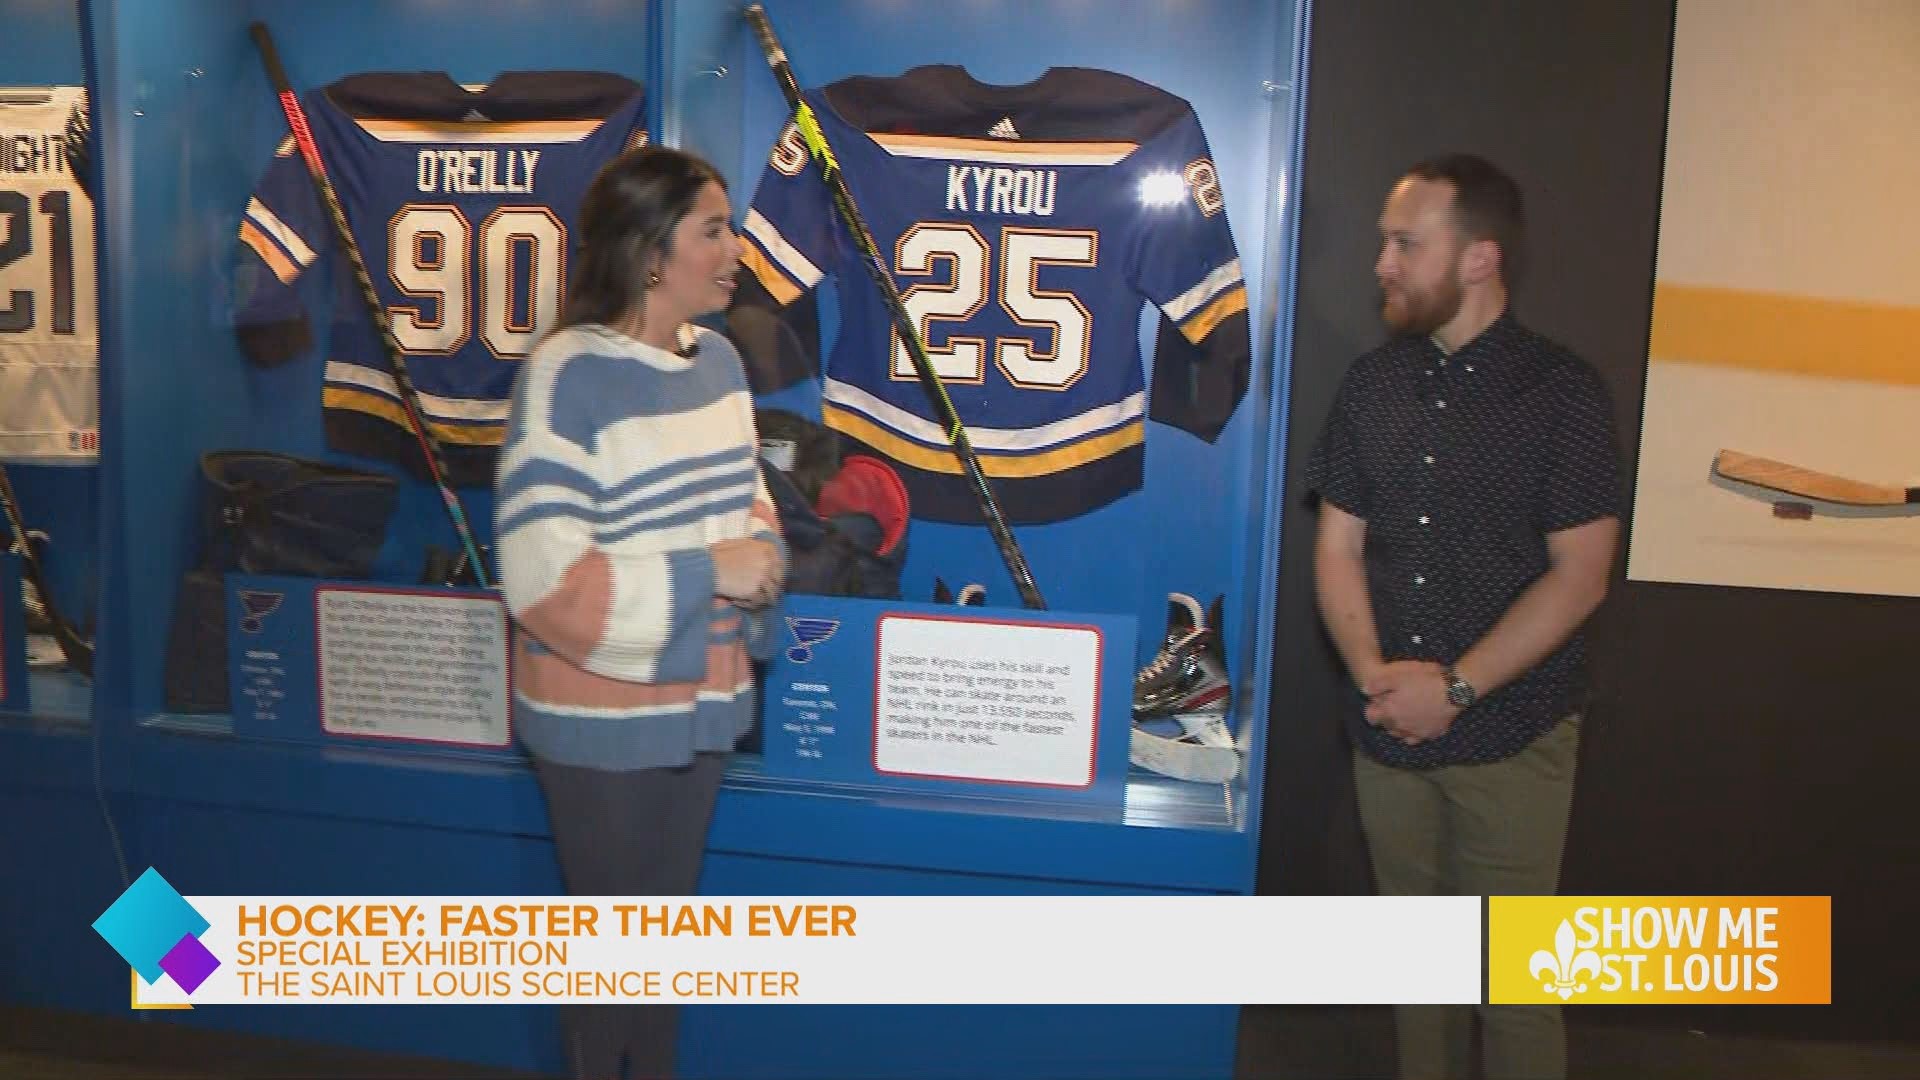 Dana DiPiazza was live to give us an inside look at the new interactive exhibit that shows the science behind the sport of hockey.